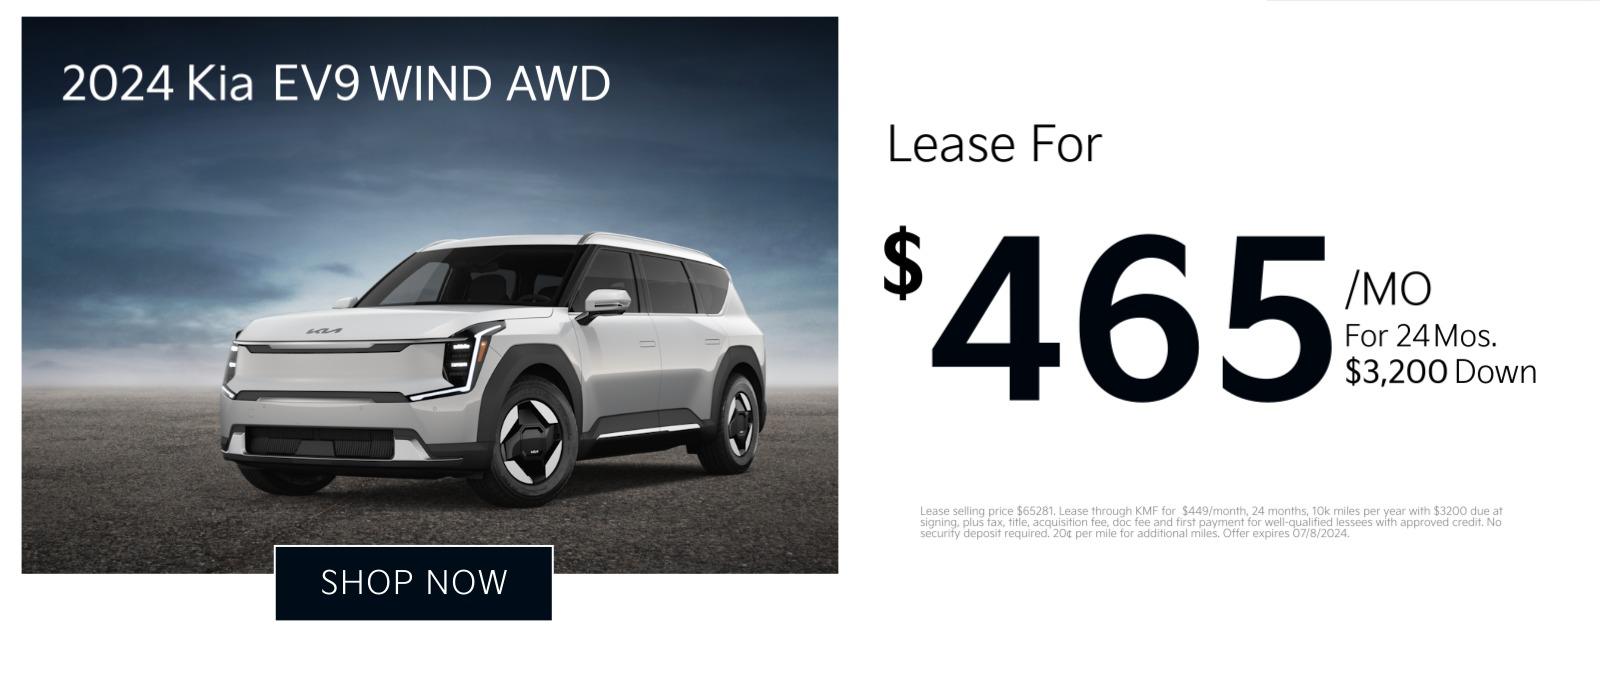 2024 Kia EV9 Wind AWD
Lease for
$465/mo
For 24 Months. $3,200 Down